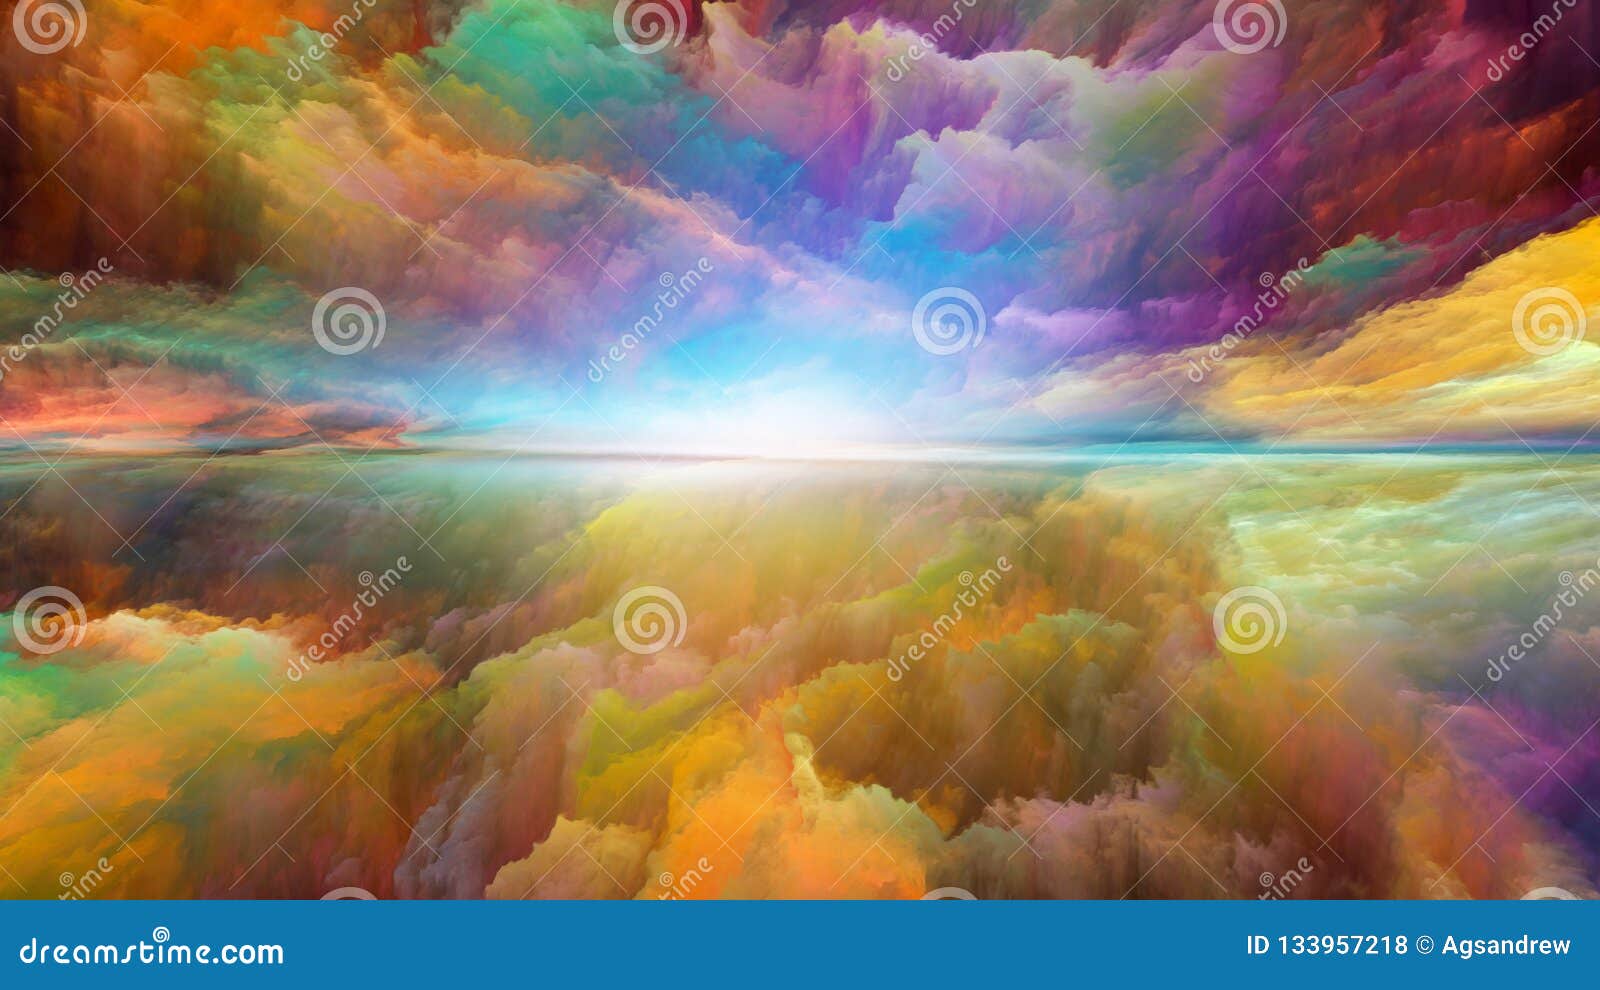 Colorful Abstract Landscape Stock Illustration - Illustration of ...